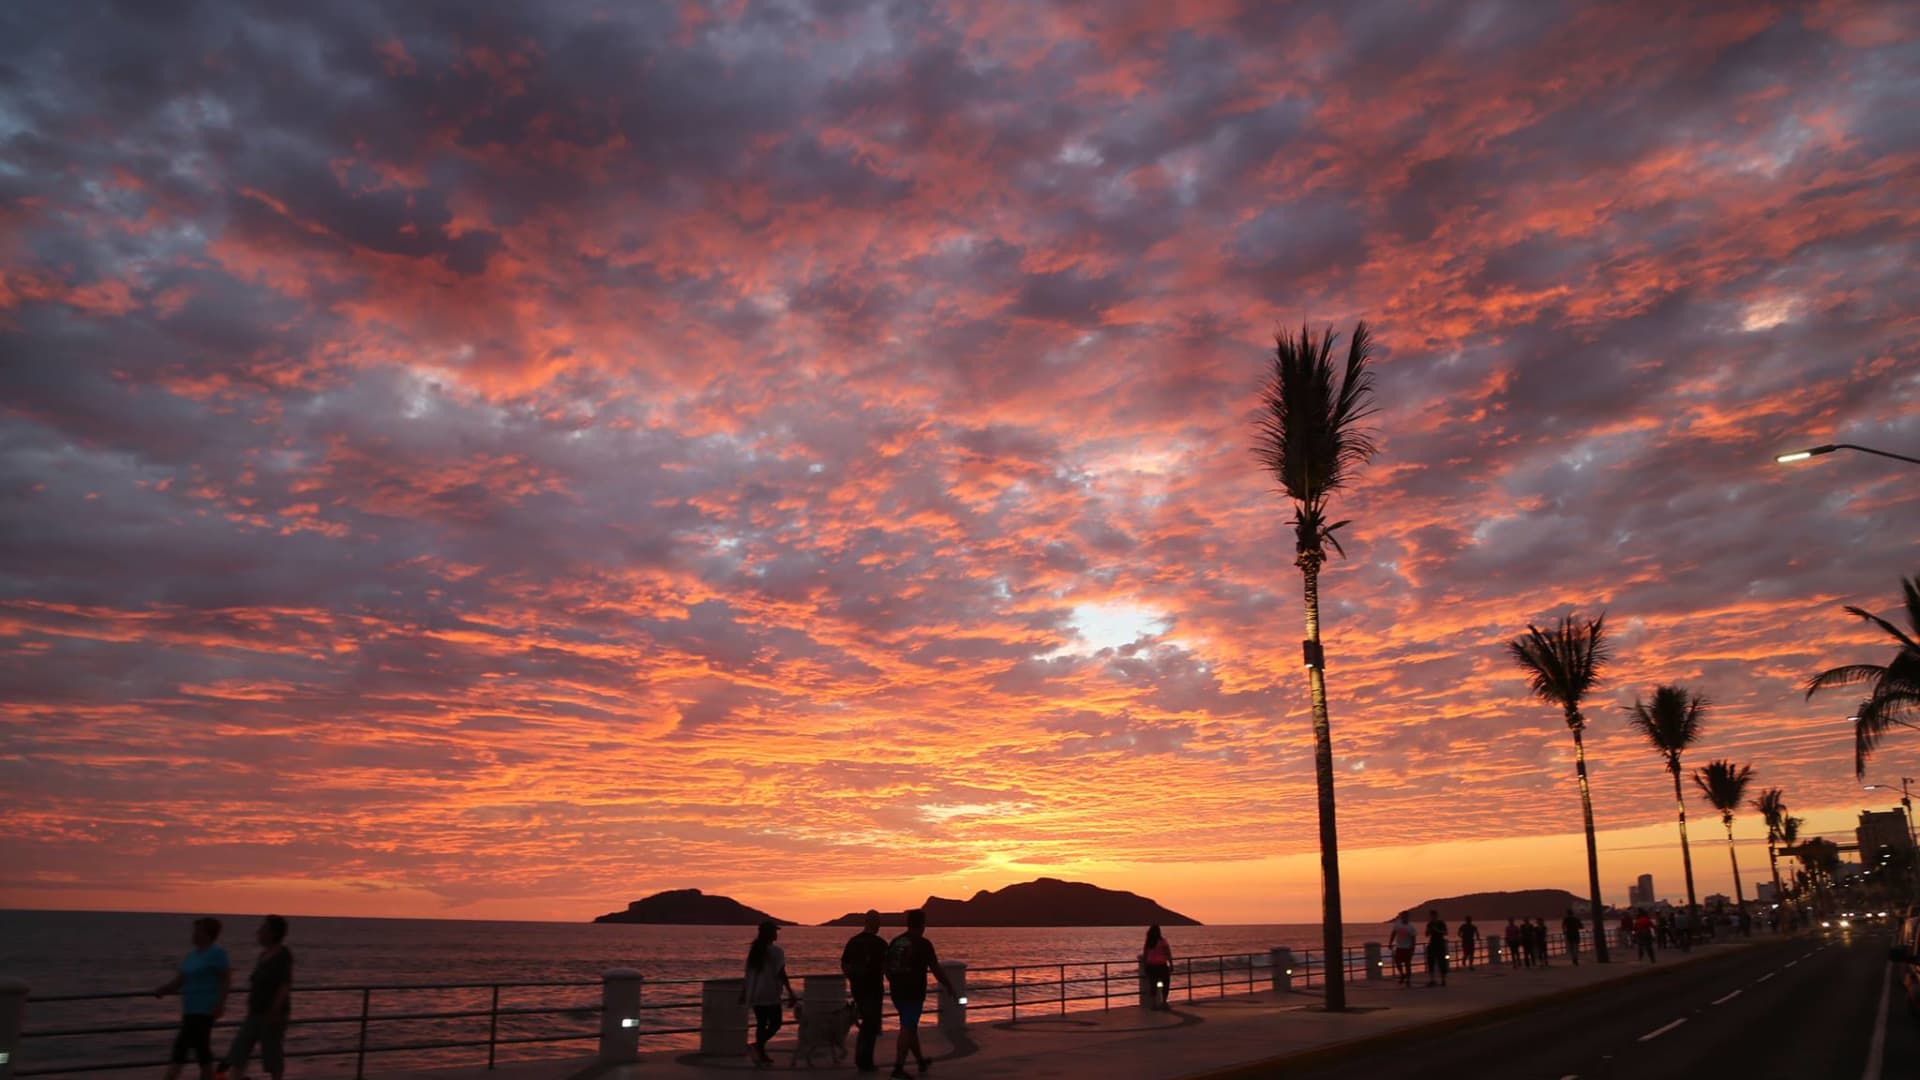 Mexico is a land full of natural beauty and amazing colors! Sunsets like these are the norm in Mazatlán.